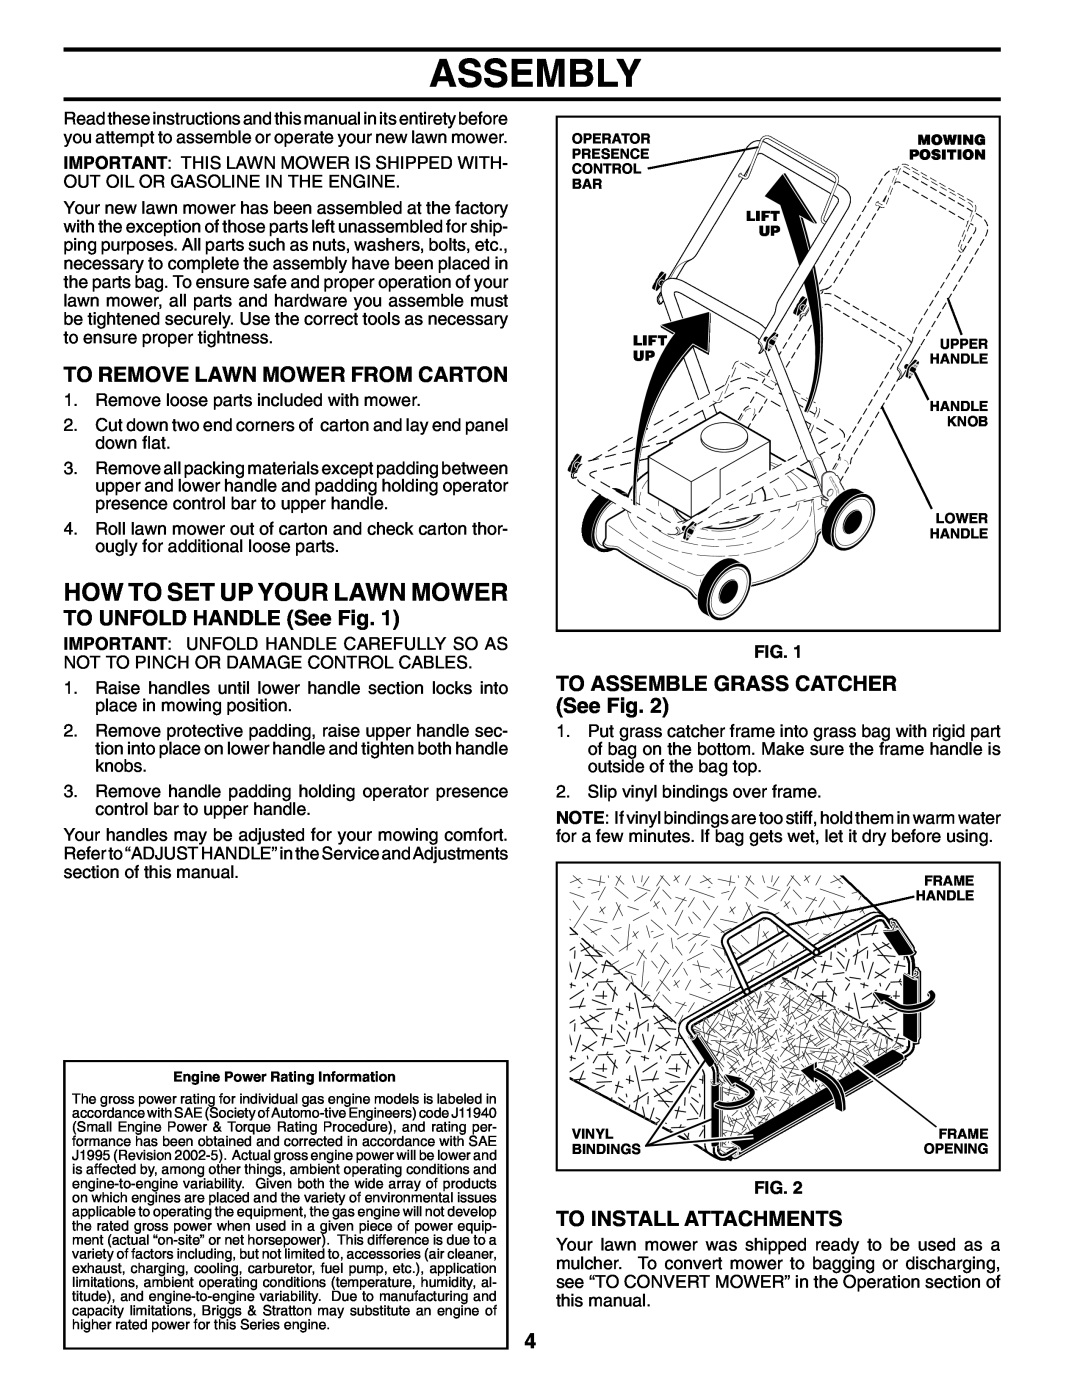 Husqvarna 62522SH Assembly, How To Set Up Your Lawn Mower, To Remove Lawn Mower From Carton, TO UNFOLD HANDLE See Fig 